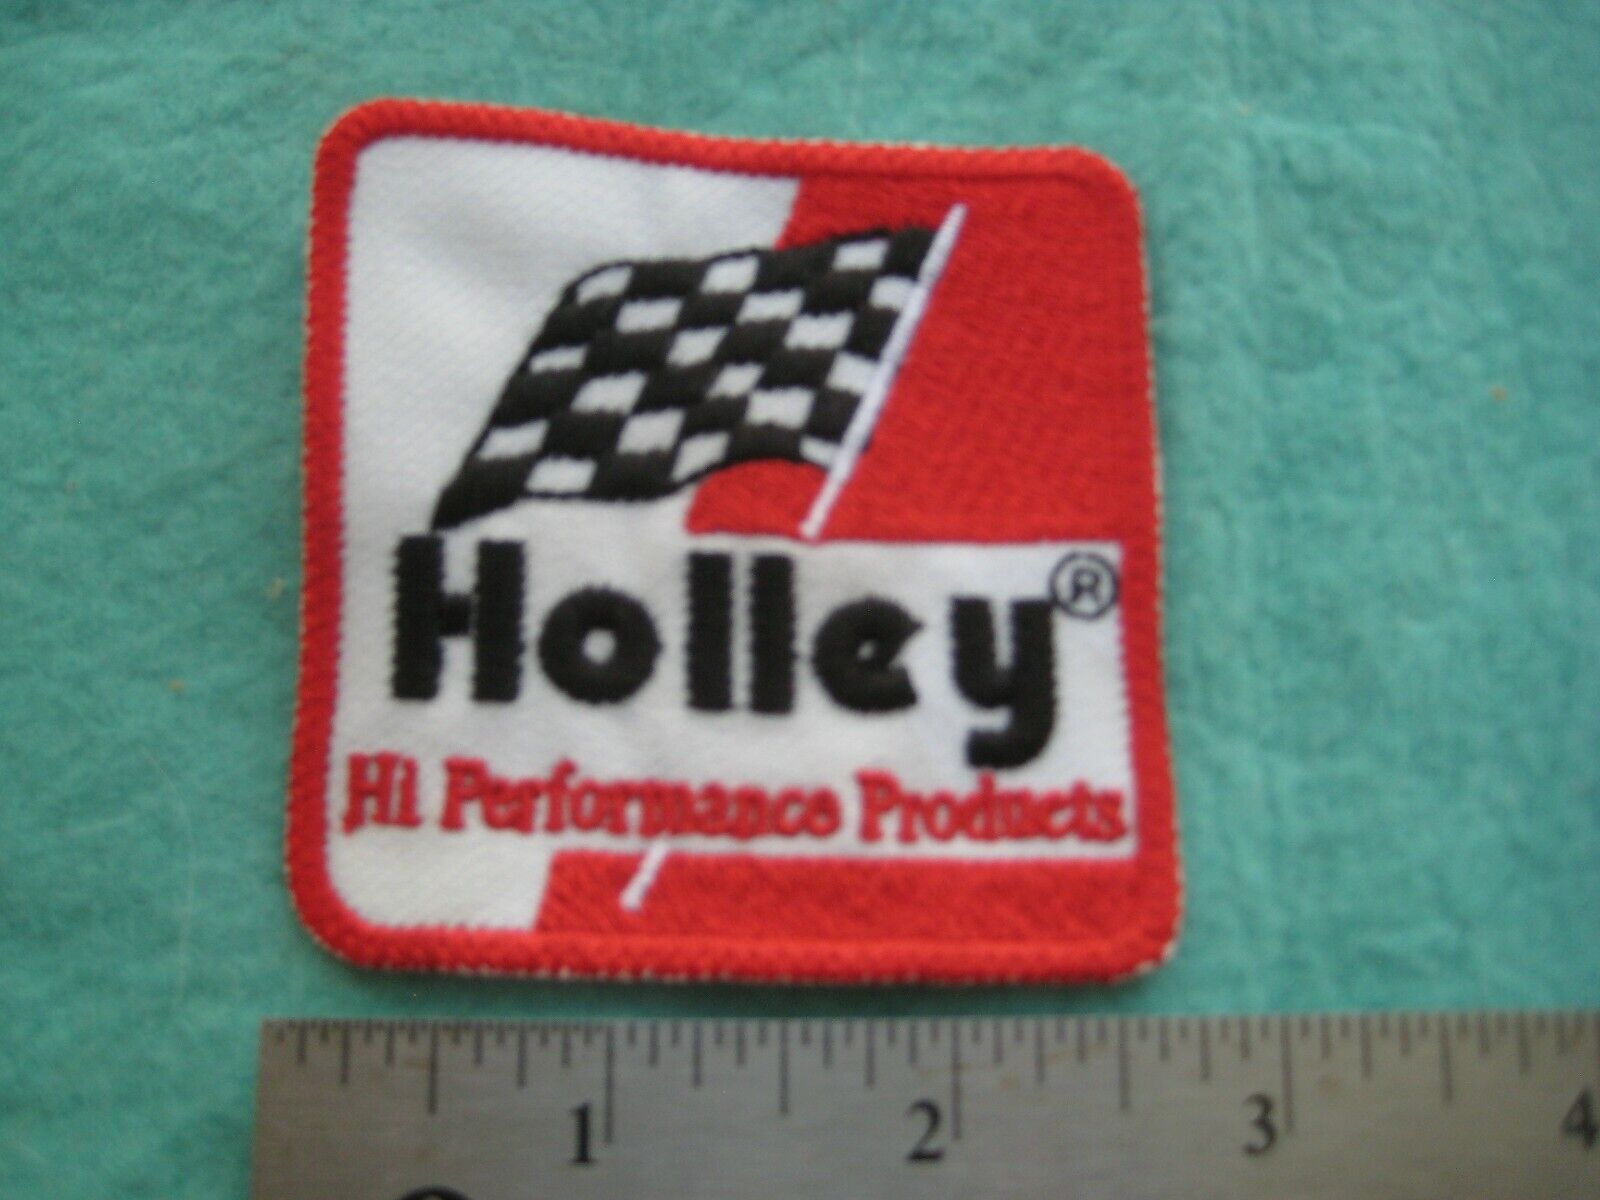 Holley Hi Performance Products  Racing Team Service Parts Dealer Hat Patch